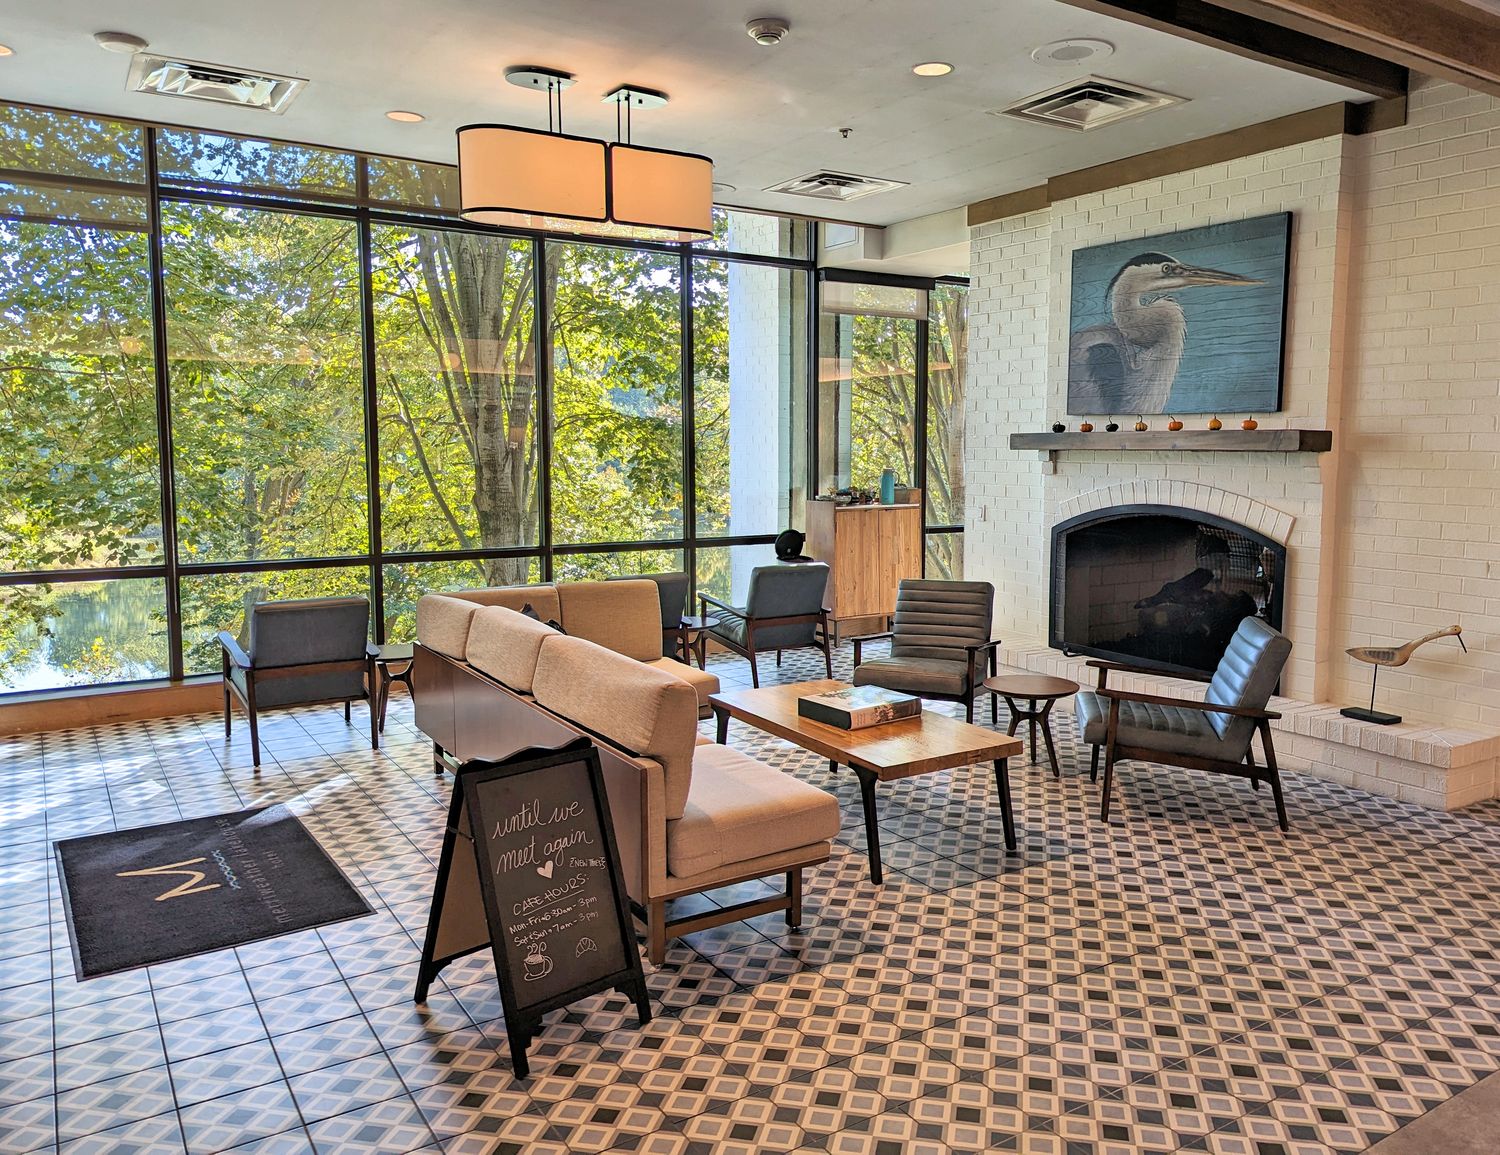 The sitting area and fireplace at the Osprey Cafe at Merriweather Lakehouse Hotel